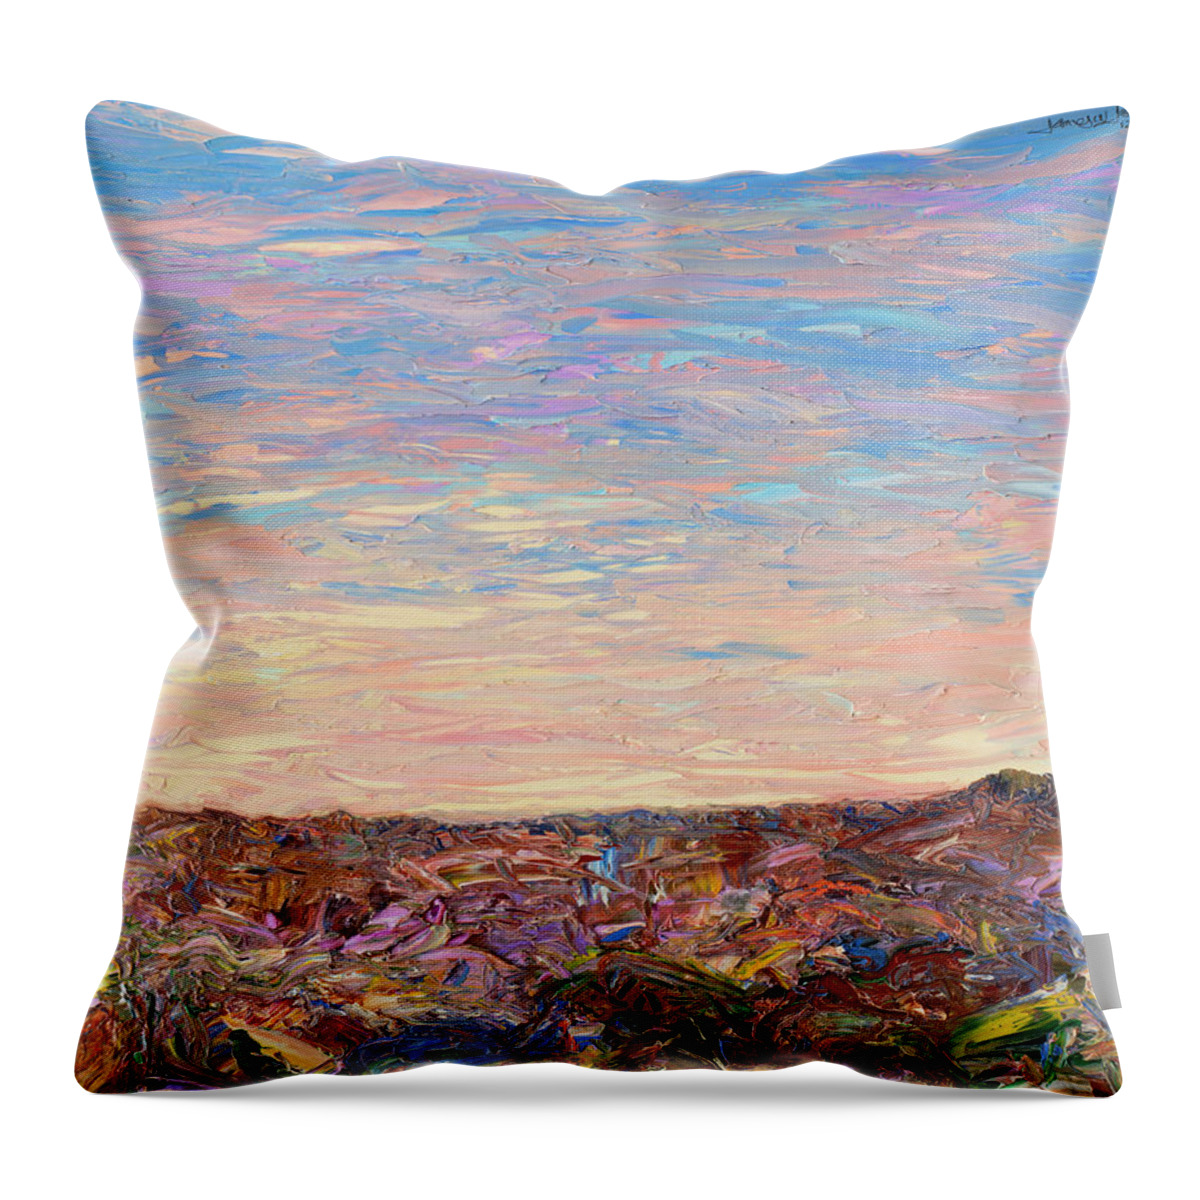 Daybreak Throw Pillow featuring the painting Daybreak by James W Johnson